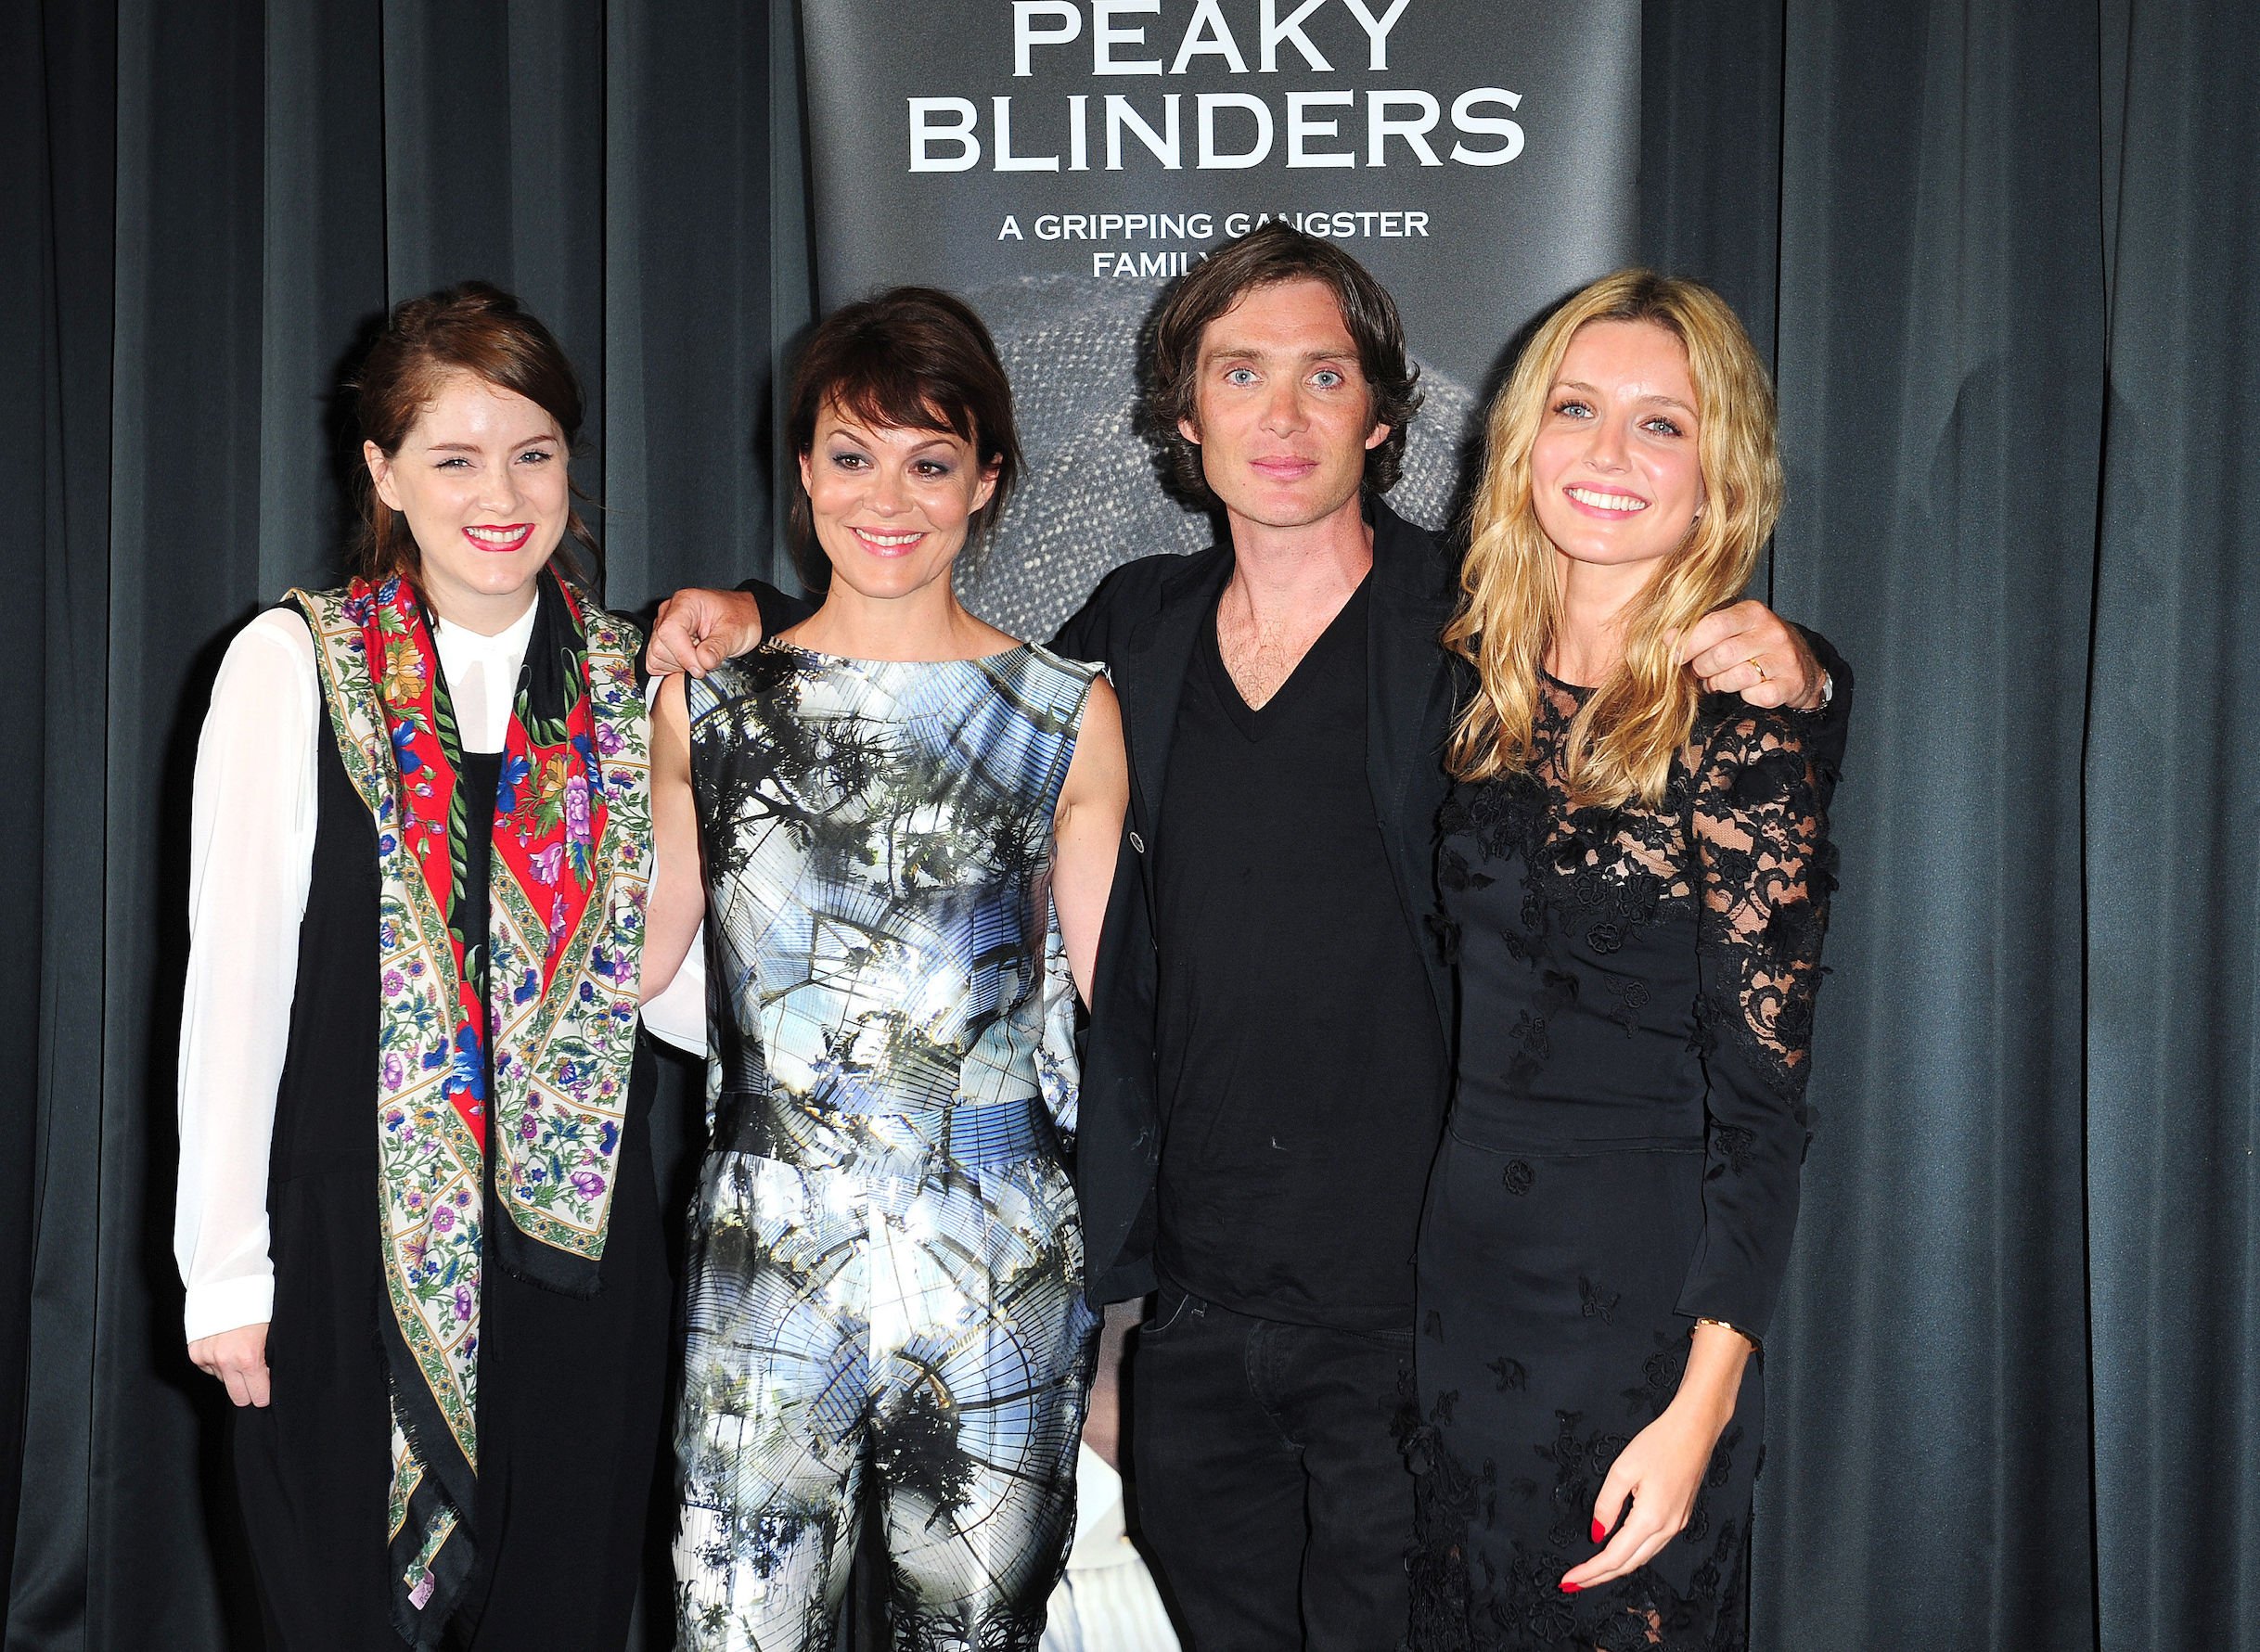 Sophie Rundle, Helen McCrory, Cillian Murphy, and Annabelle Wallis from 'Peaky Blinders' Season 6 standing next to each other in front of a show poster